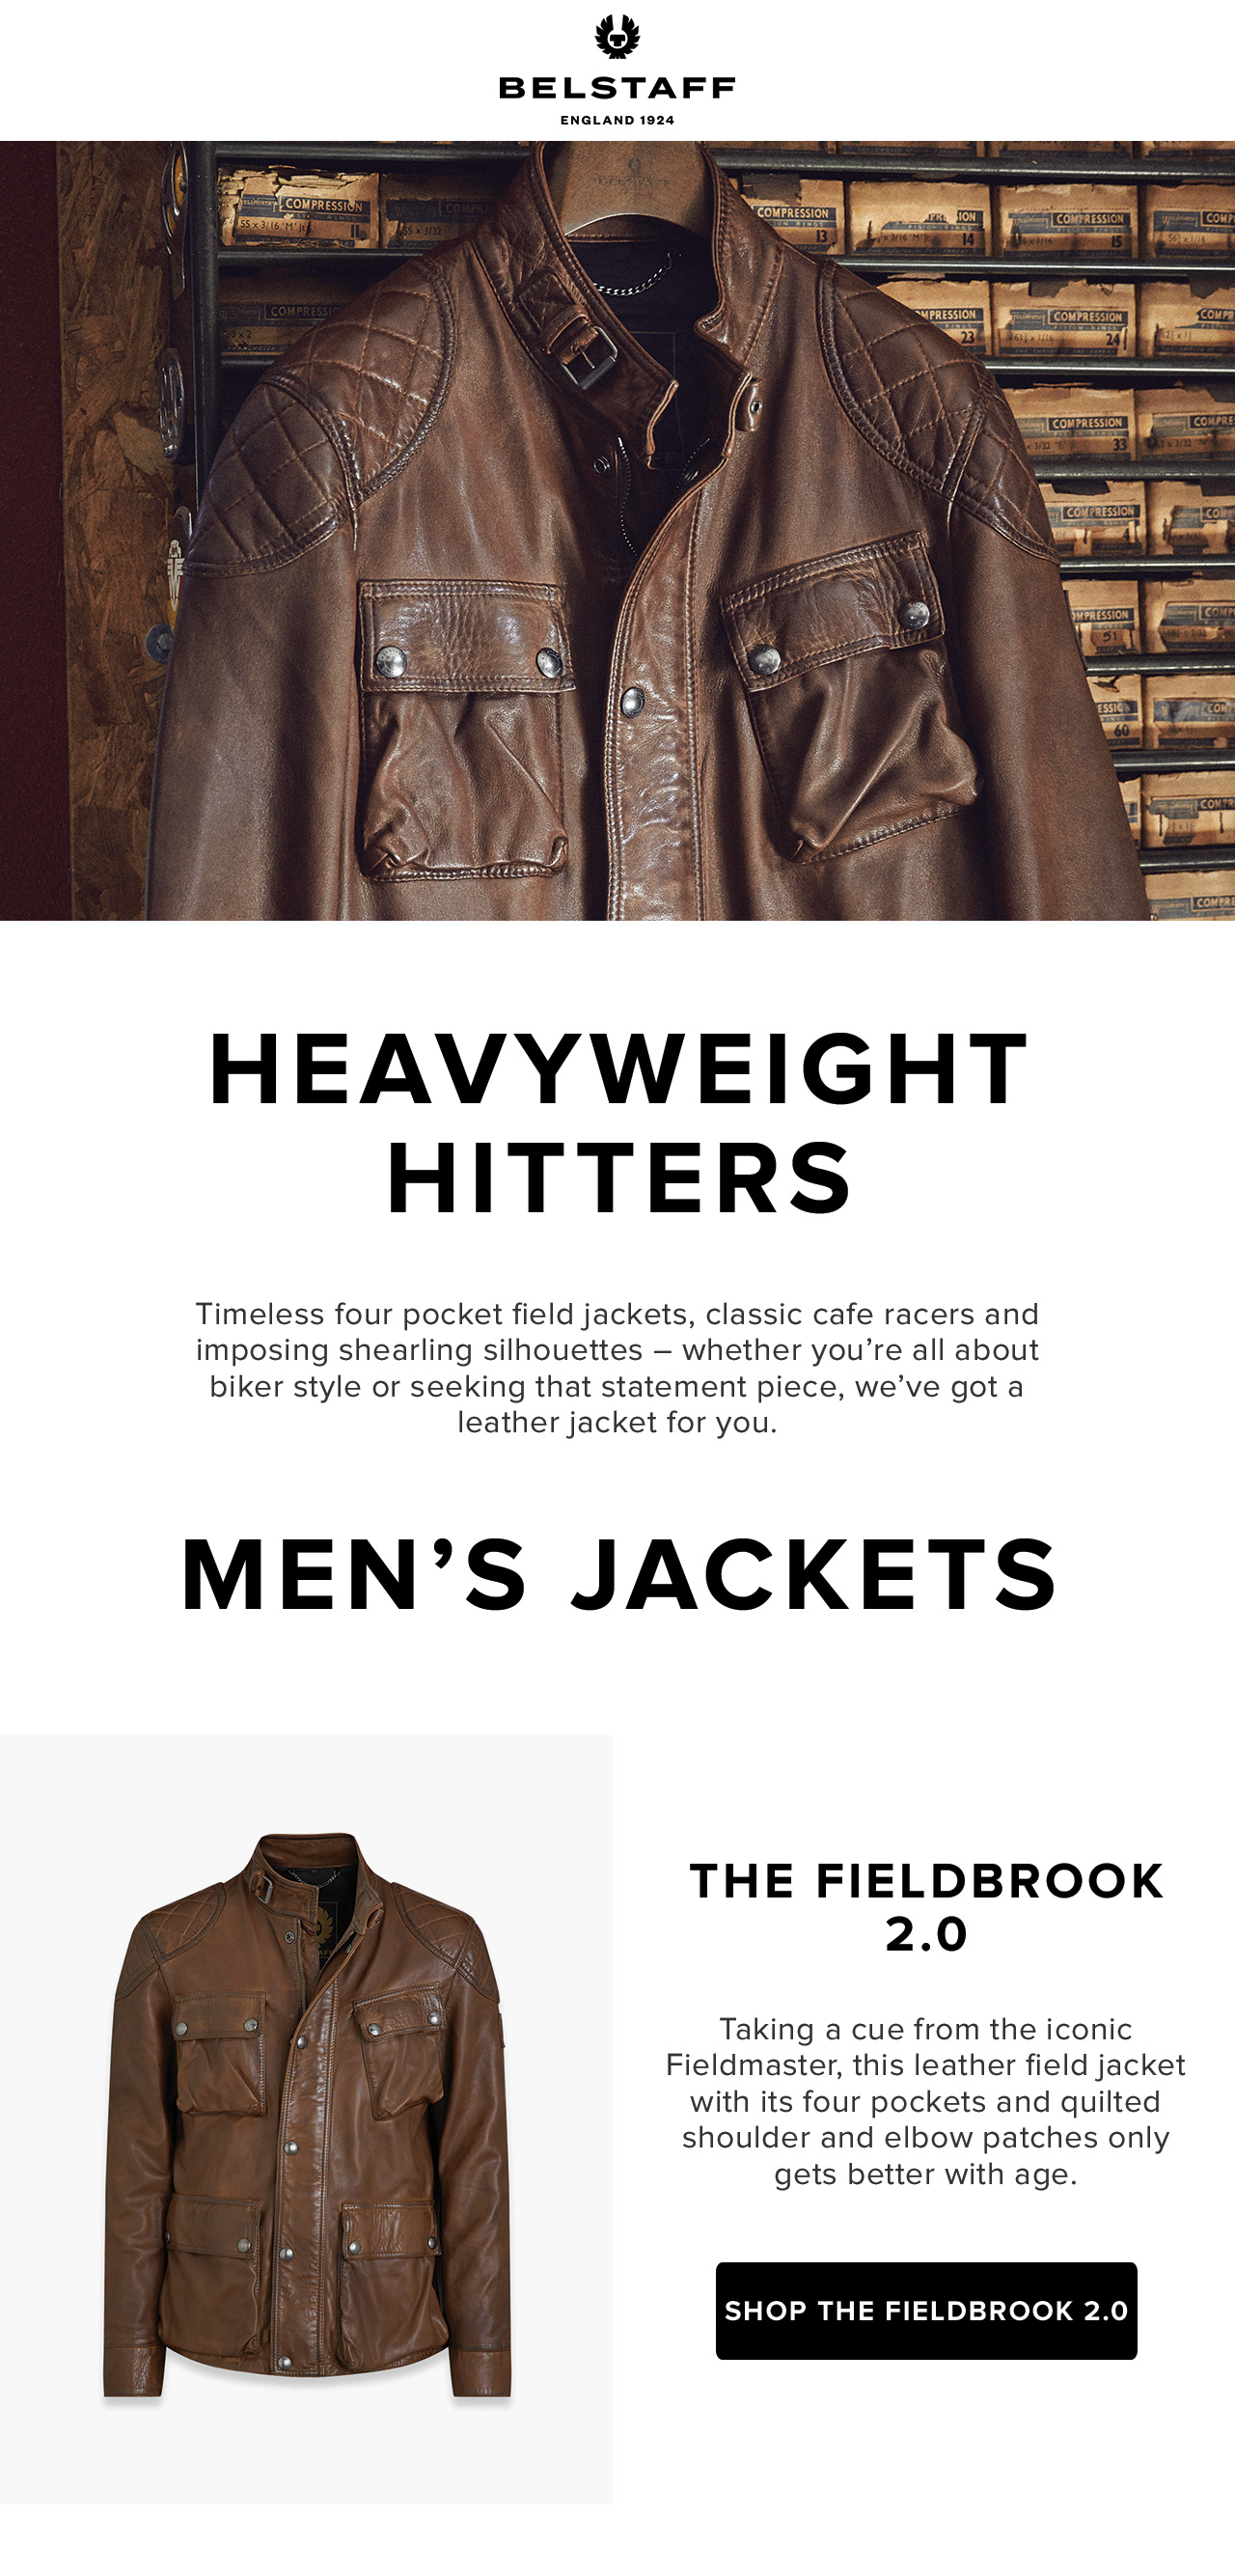 Timeless four pocket field jackets, classic cafe racers and imposing shearling silhouettes - whether you're all about biker style or seeking that statement piece, we've got a leather jacket for you.	